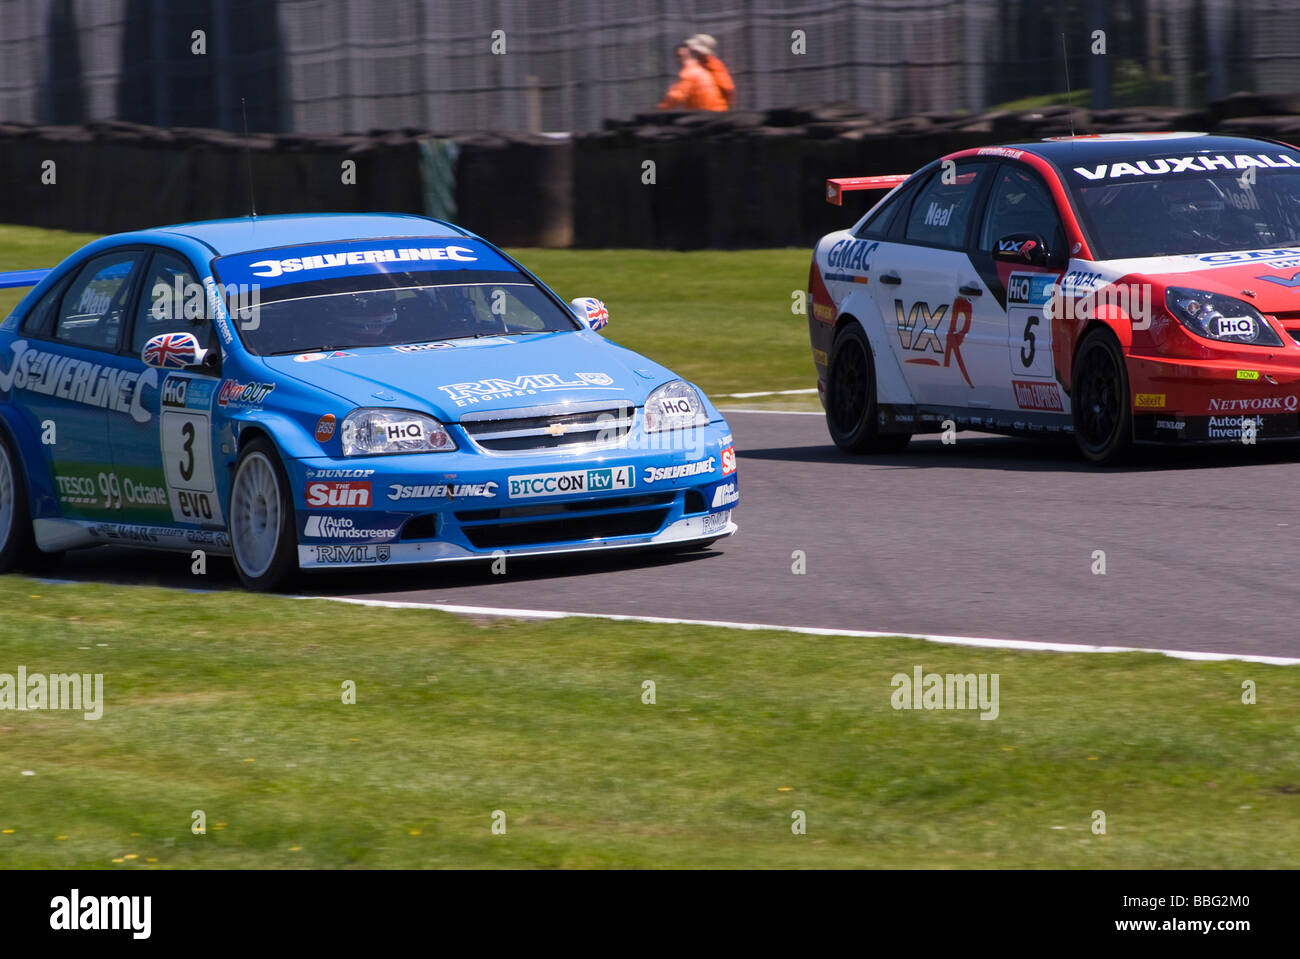 Chevrolet Lacetti and Vauxhall Vectra Race Cars at British Touring Car Championship at Oulton Park Cheshire England Stock Photo